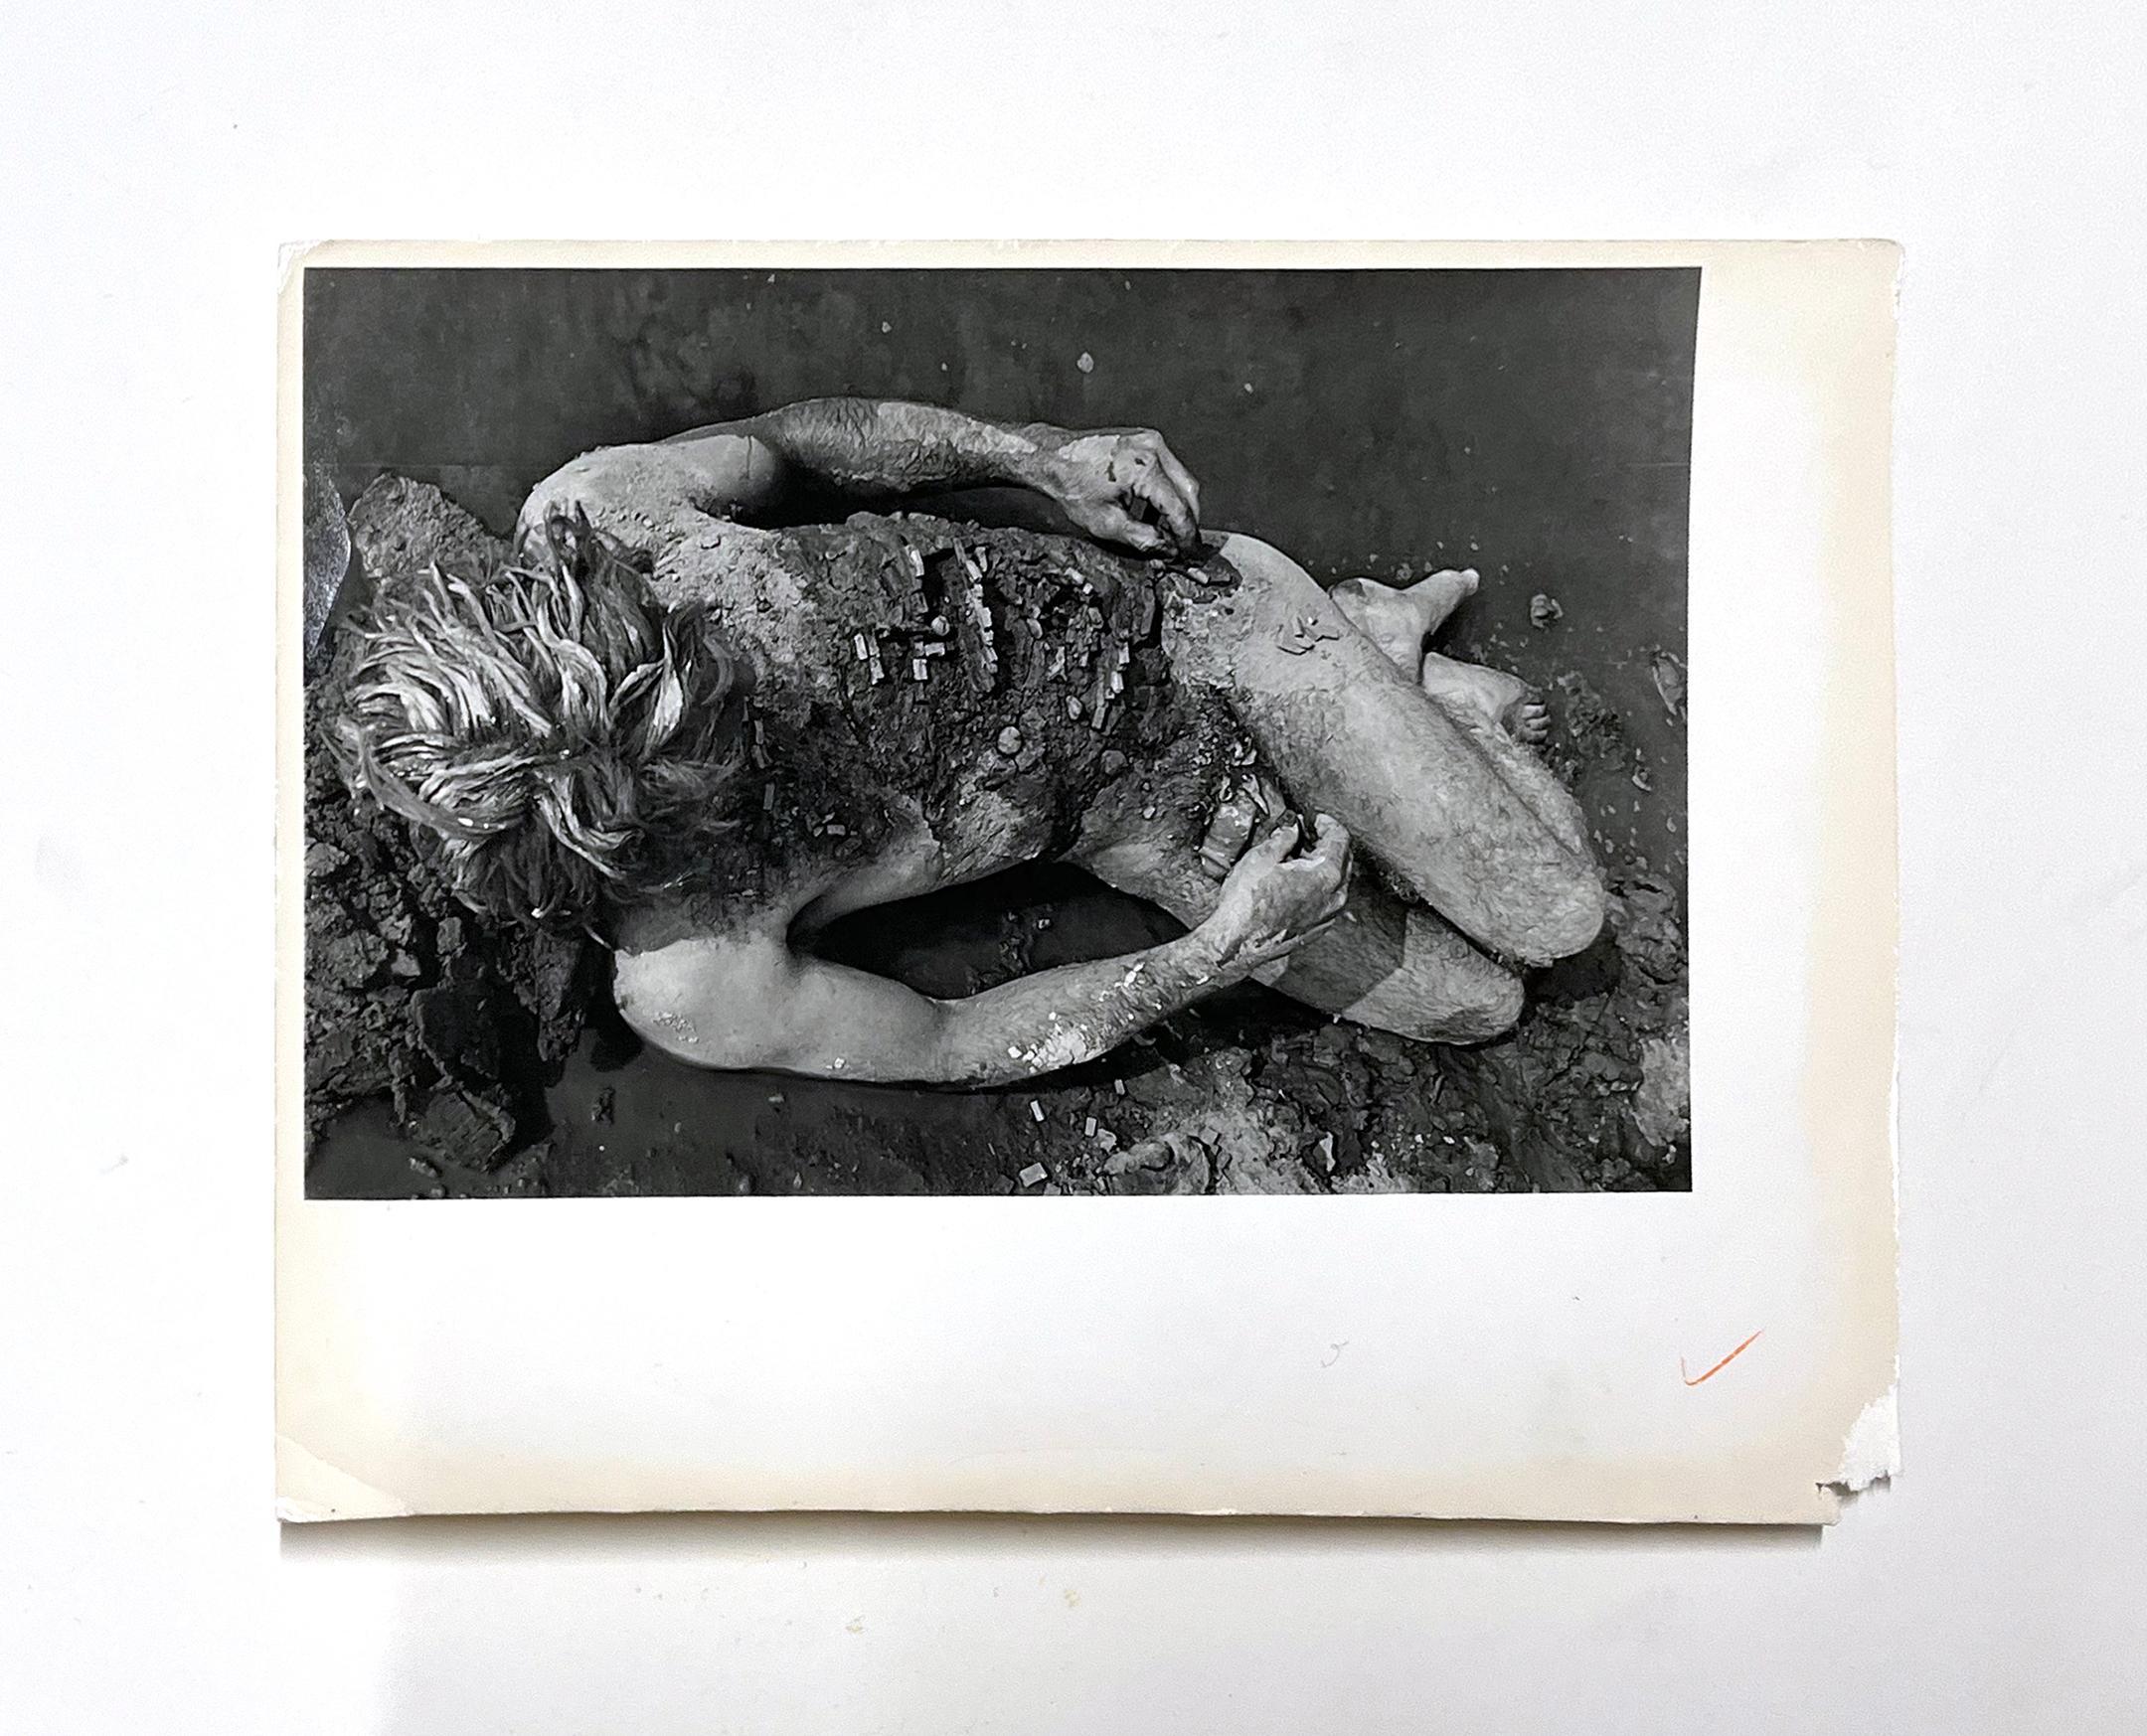 Charles Simonds Original Gelatin Silver Print from the archive of Leo Castelli